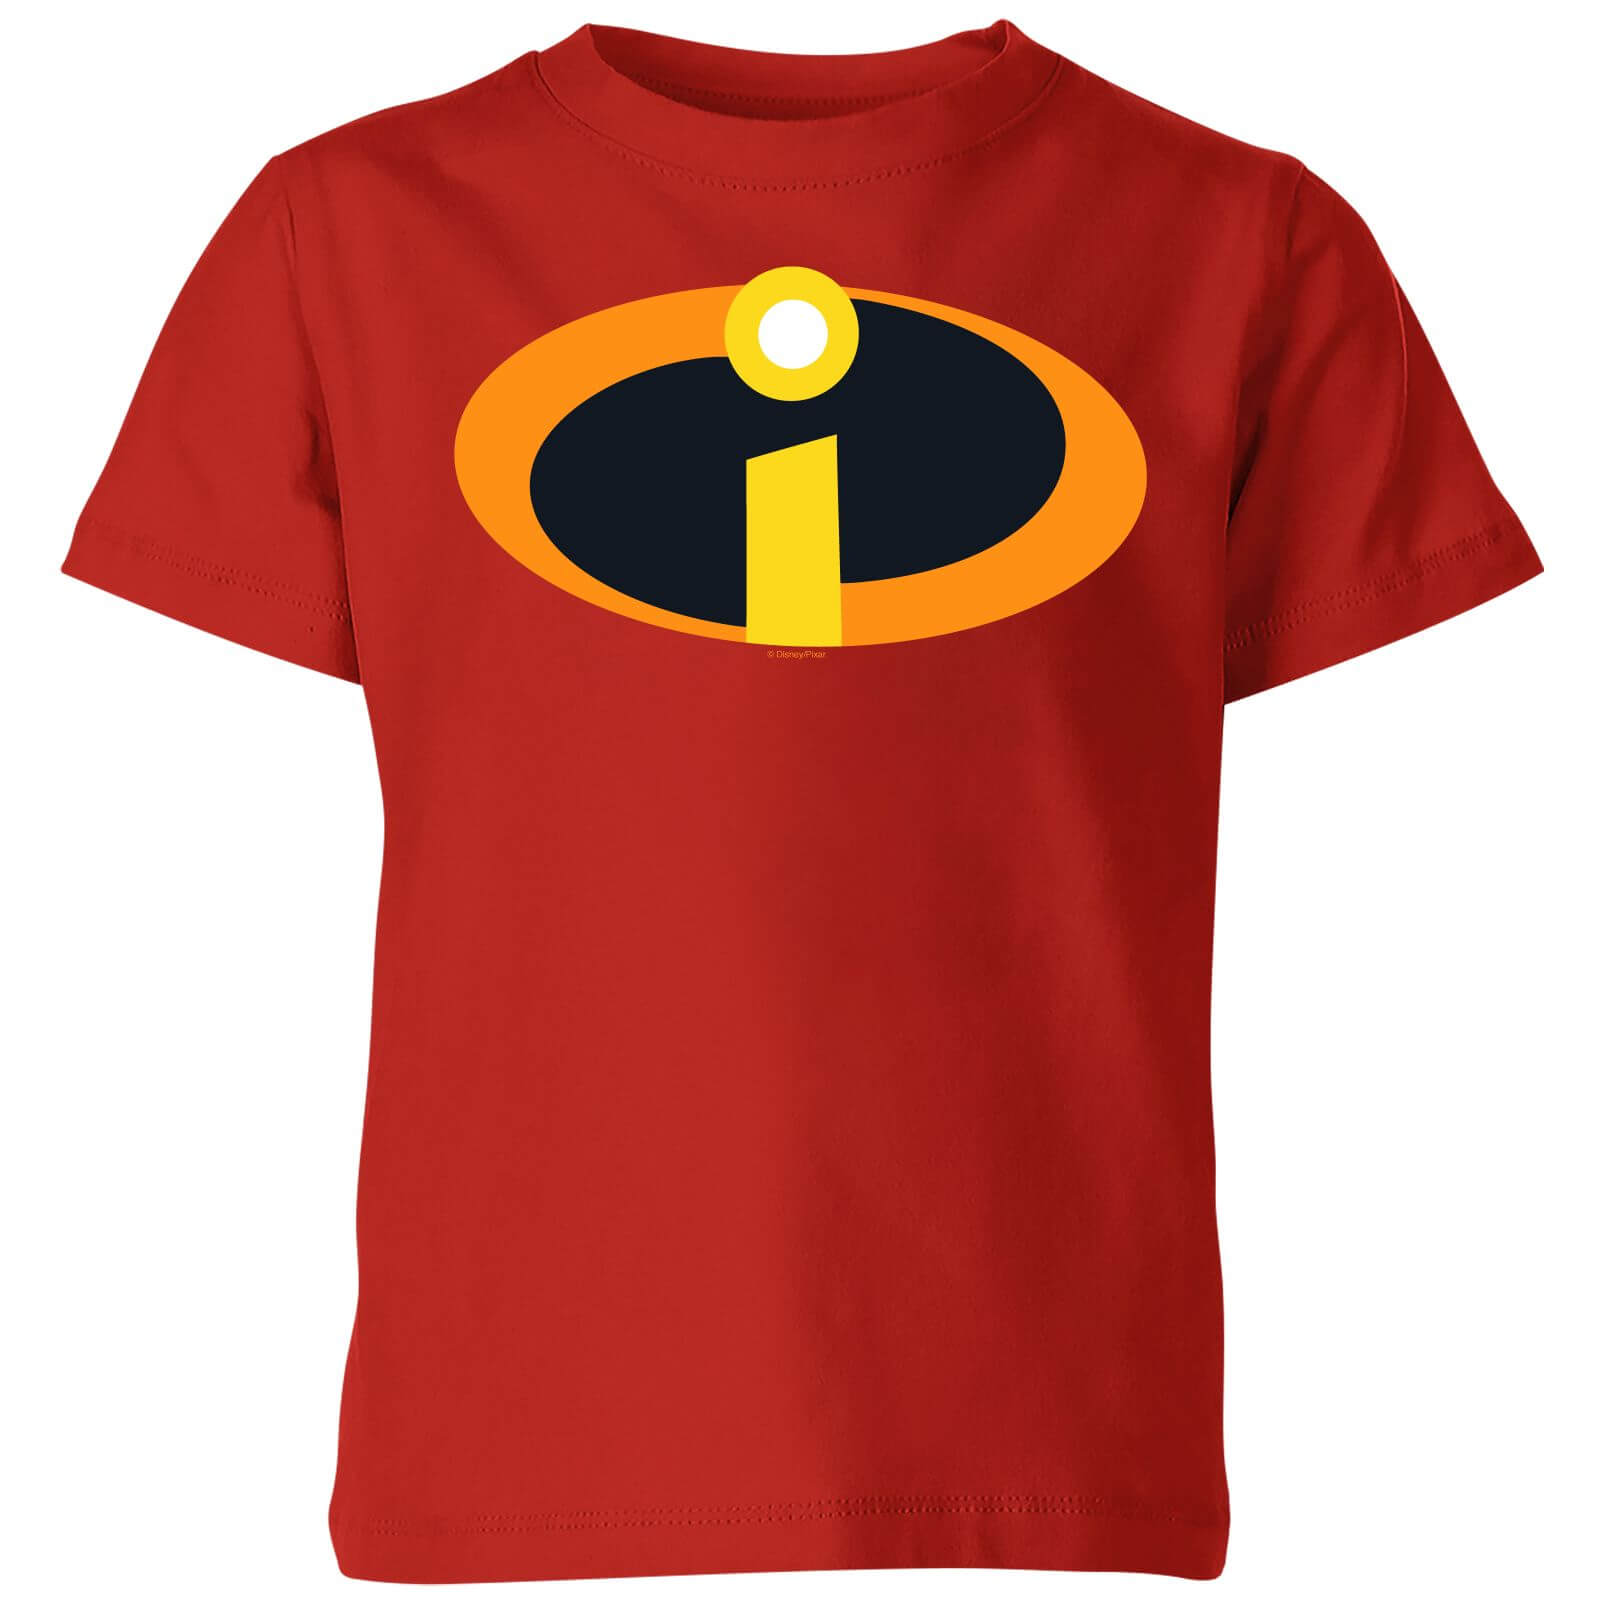 Image of Incredibles 2 Logo Kids' T-Shirt - Red - 11-12 Jahre